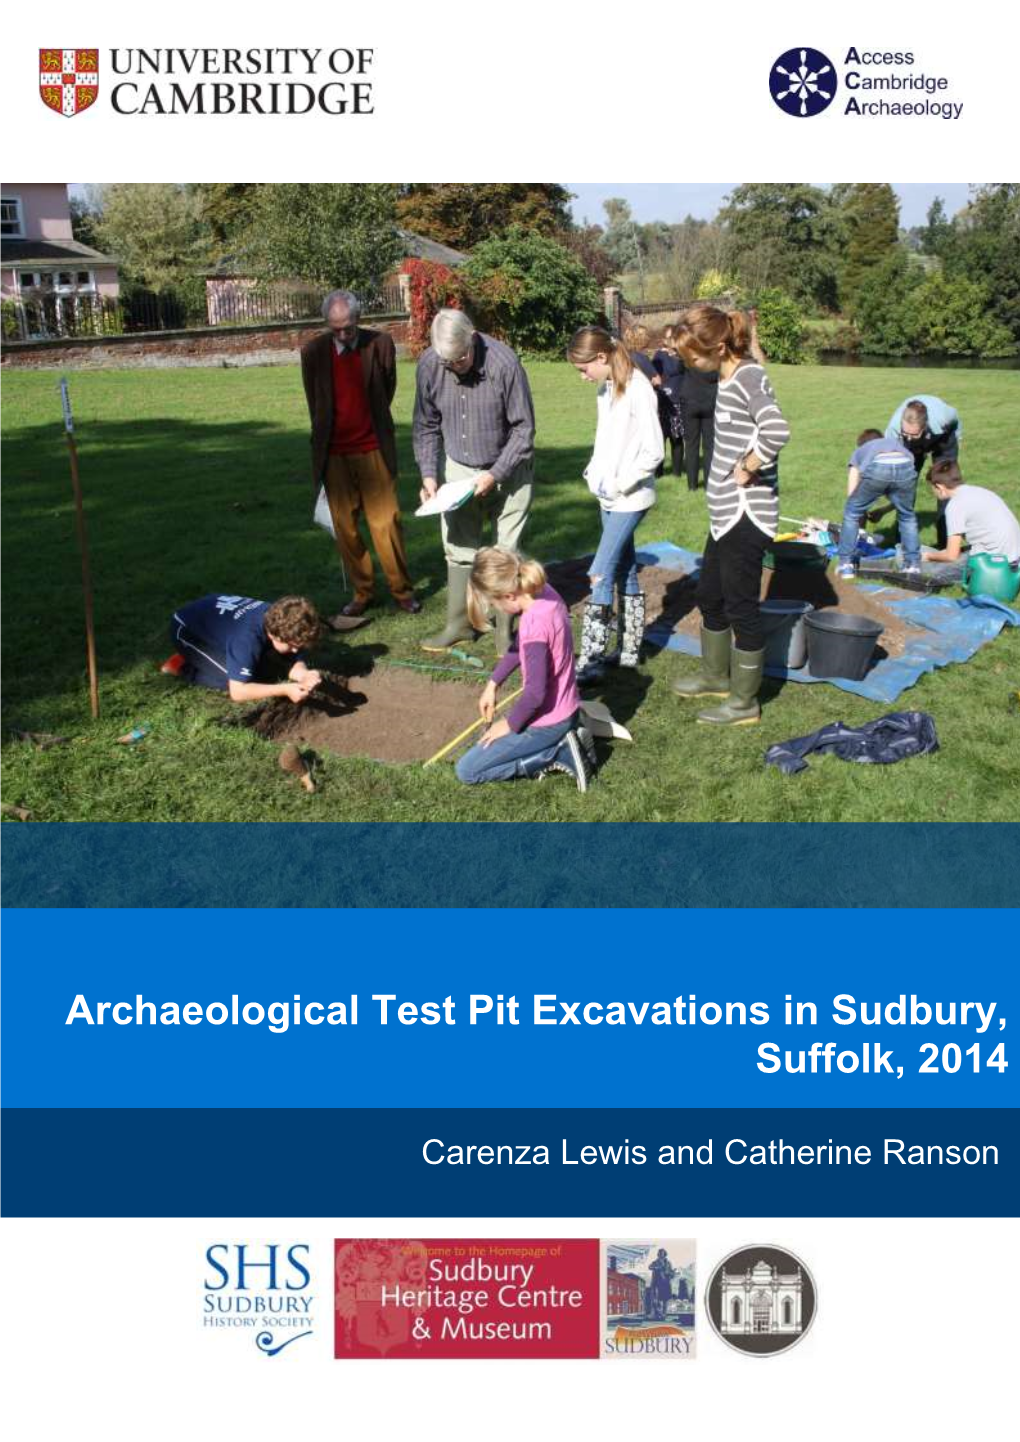 Archaeological Test Pit Excavations in Sudbury, Suffolk, 2014